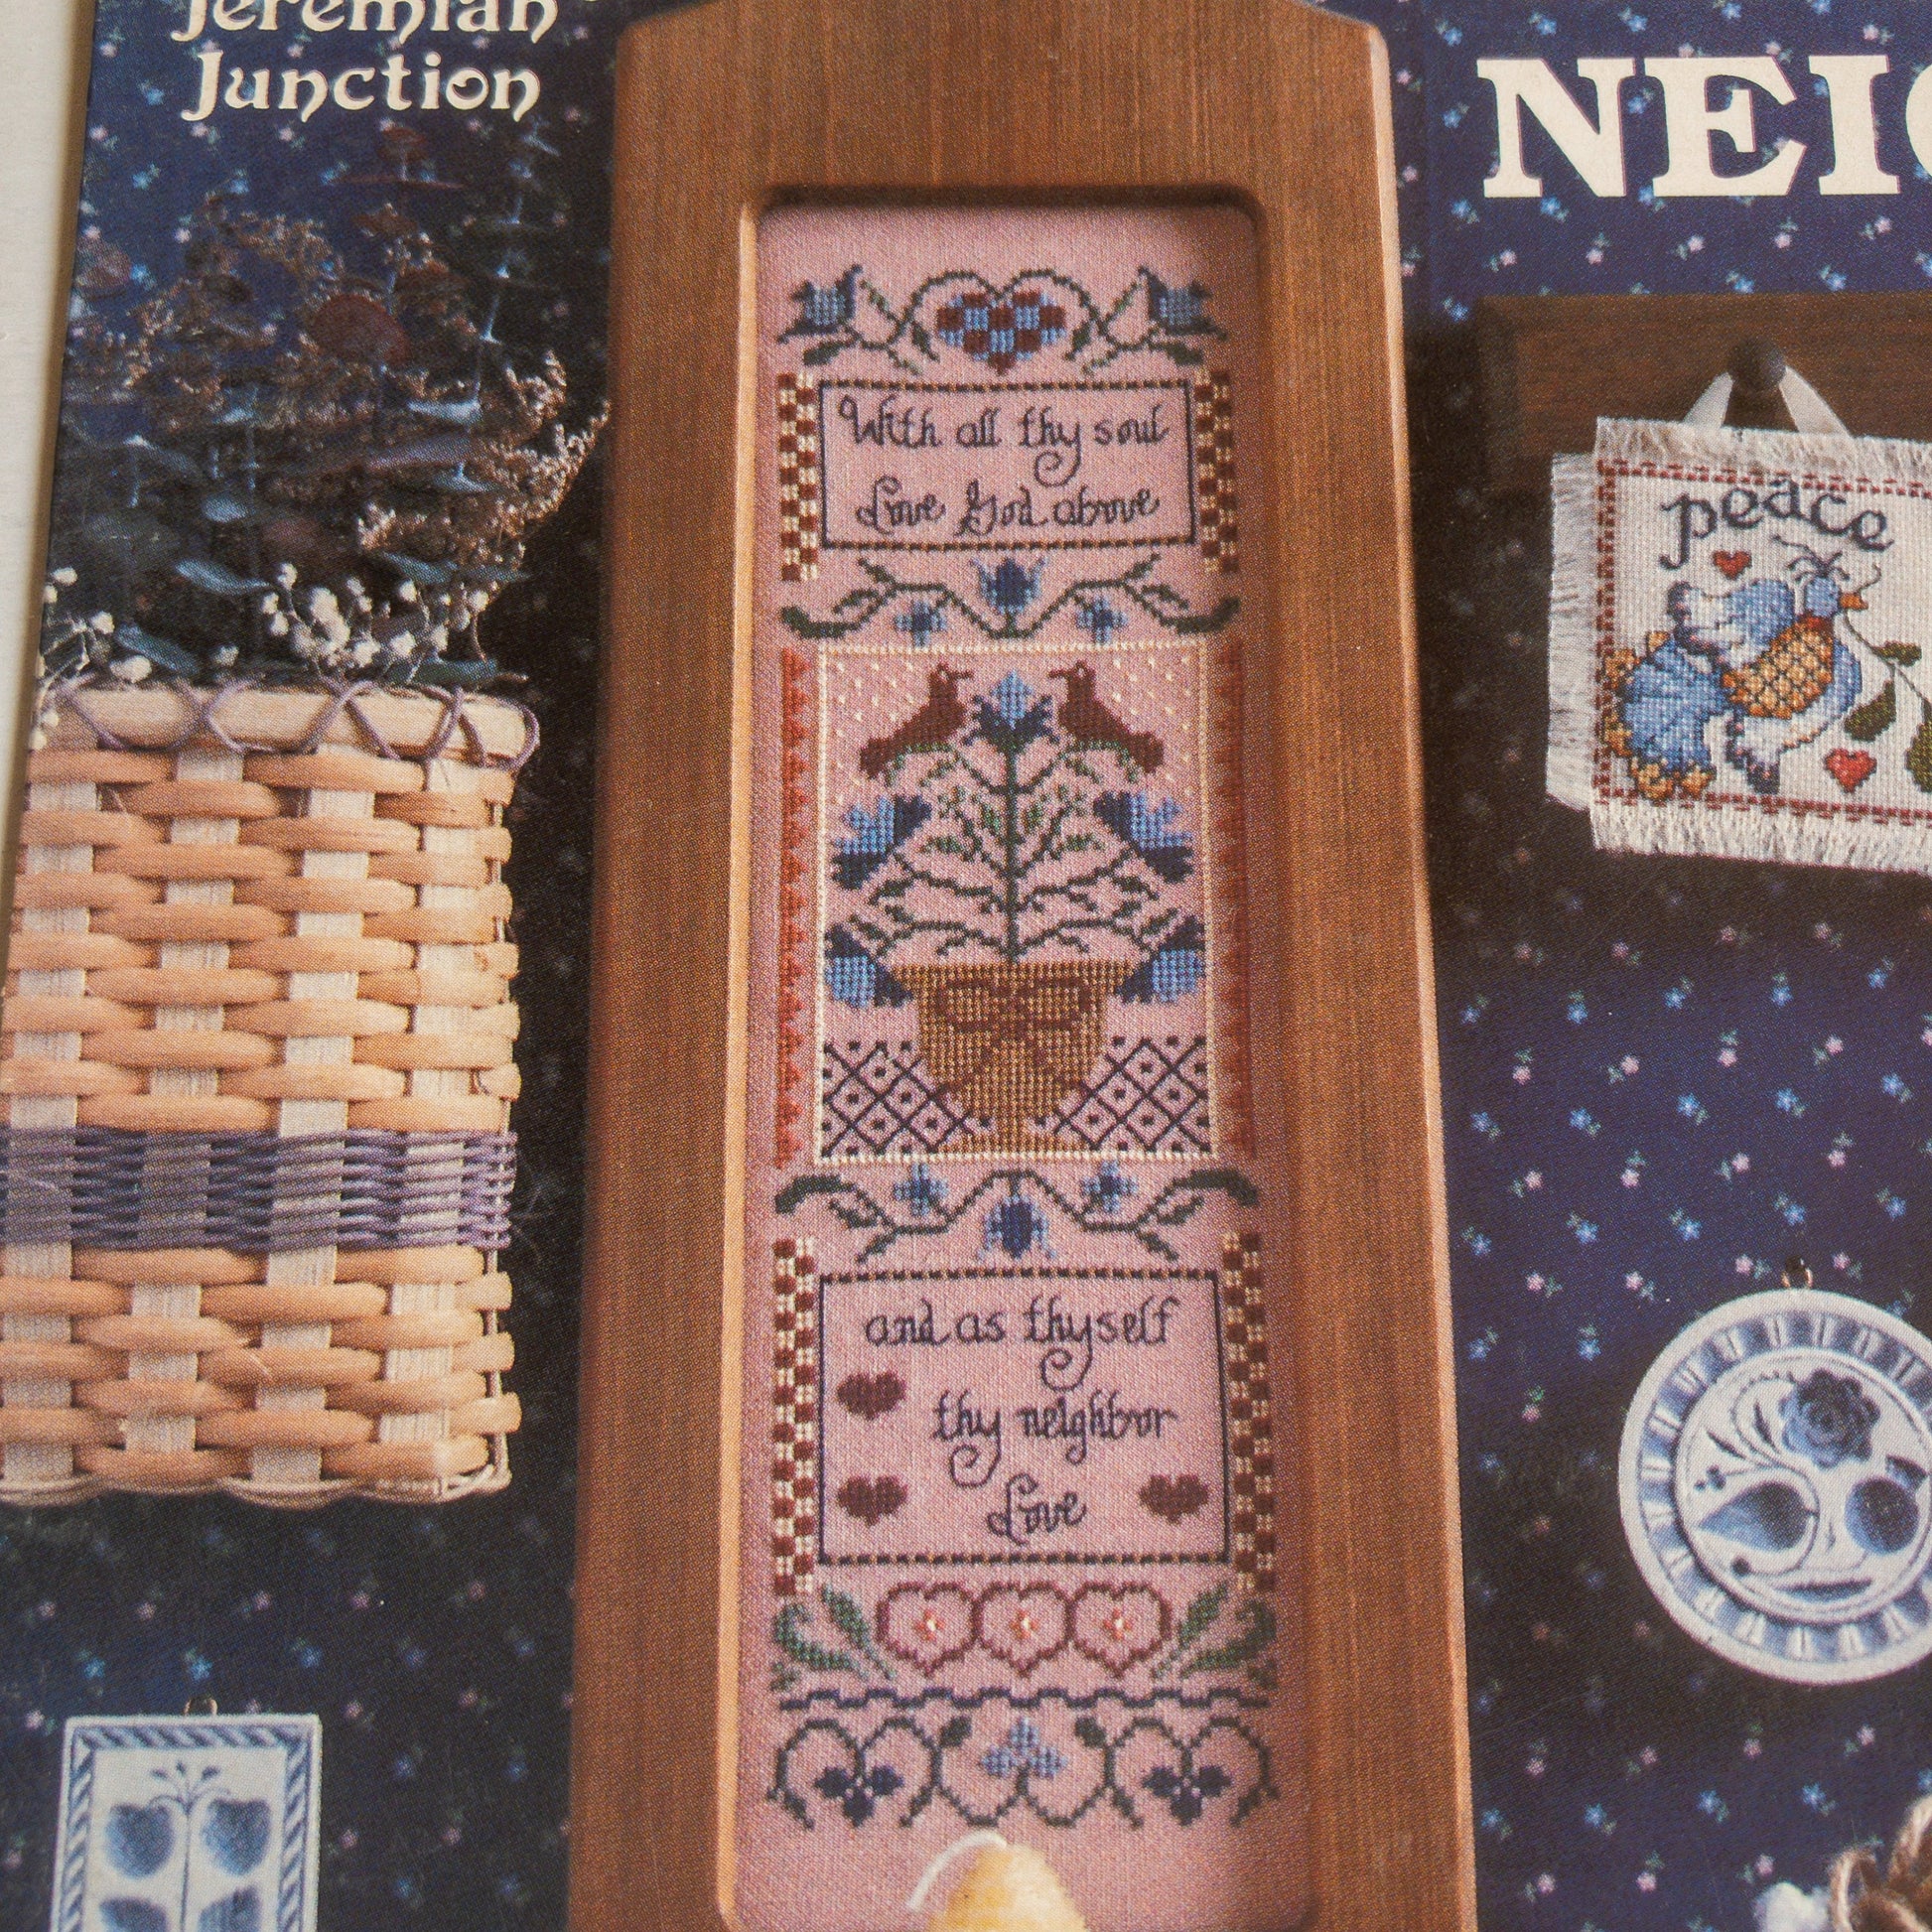 Jeremiah Junction, Welcome Neighbor, Vintage 1993, Counted Cross Stitch Chart